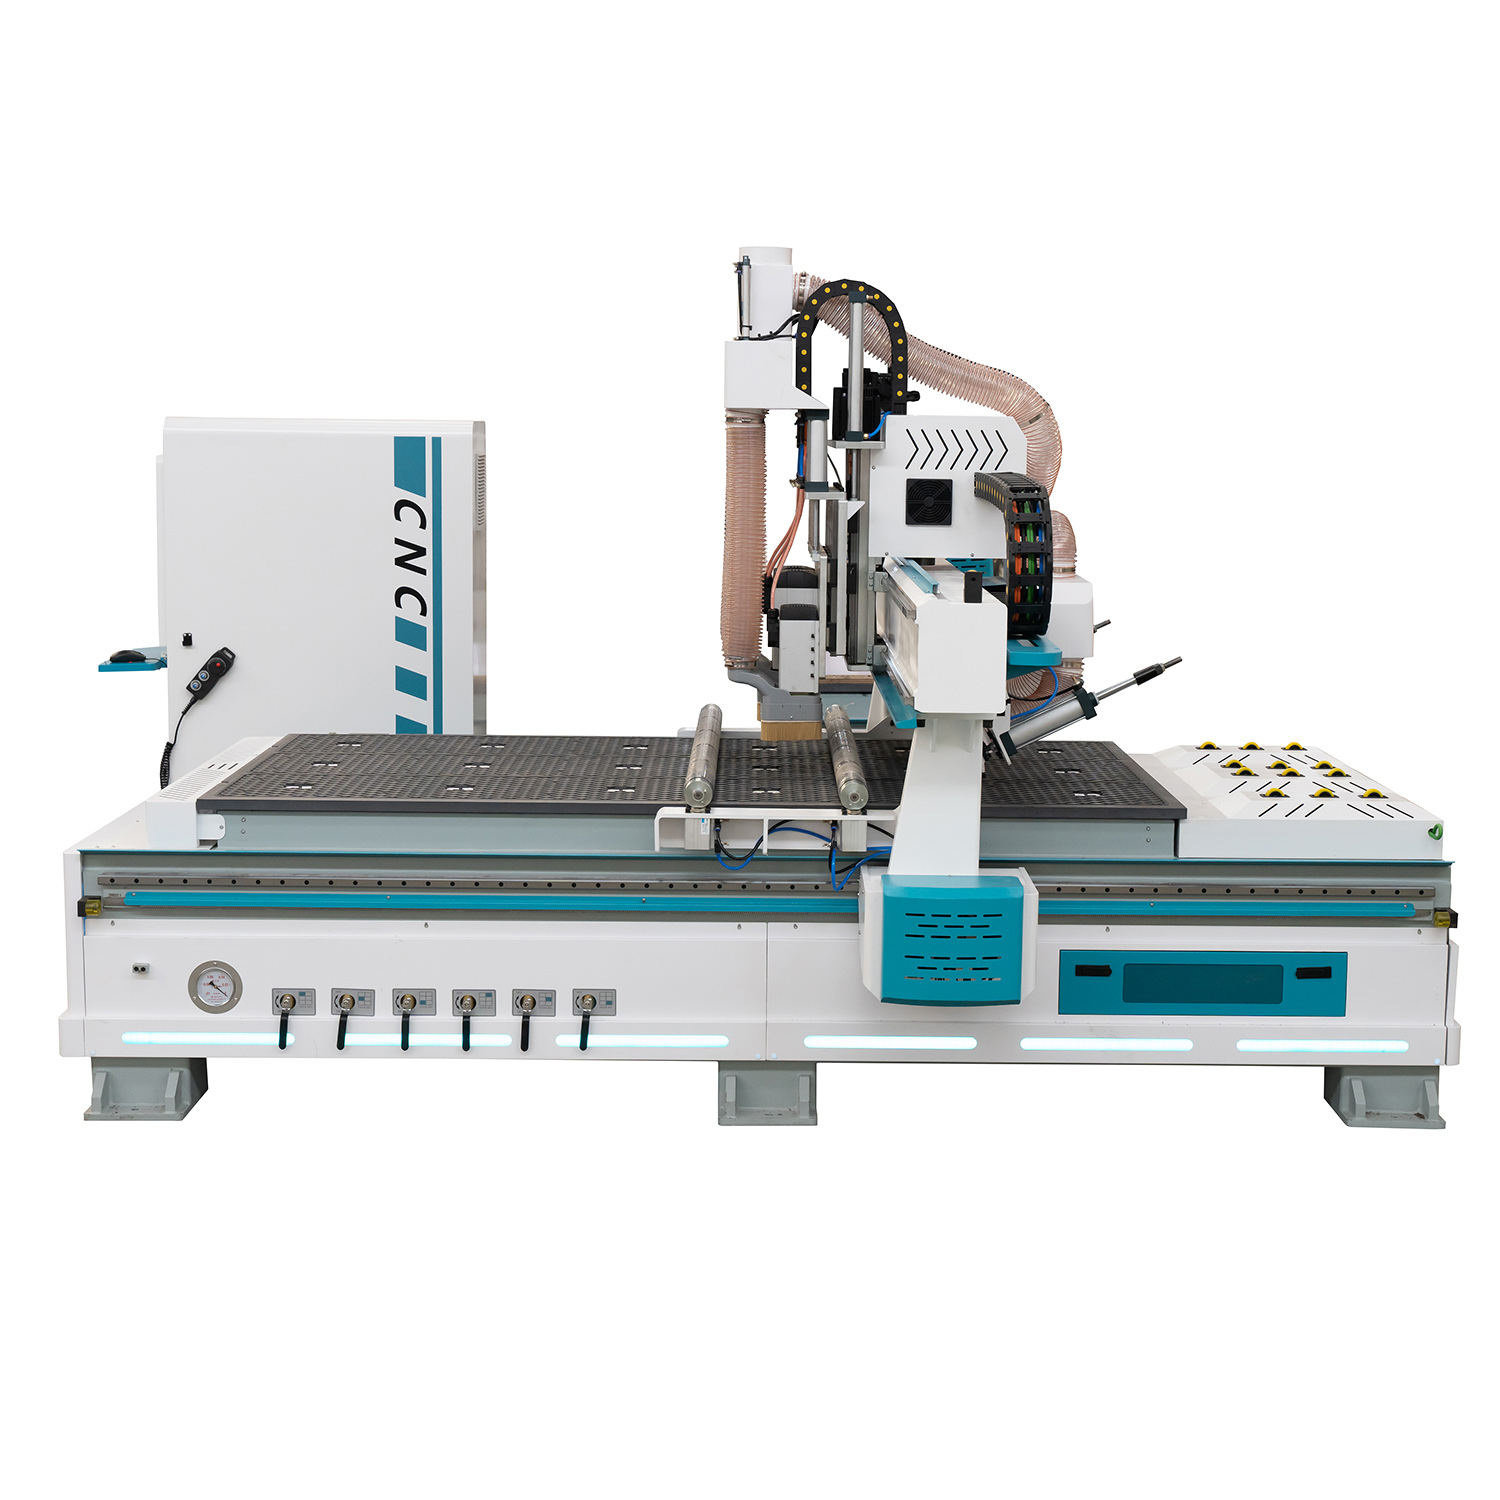 Cheapest Price China Super Star CNC Router Machine/CNC 3D Wood Router Atc Air Cooling Spindle Cheap Price Featured Image